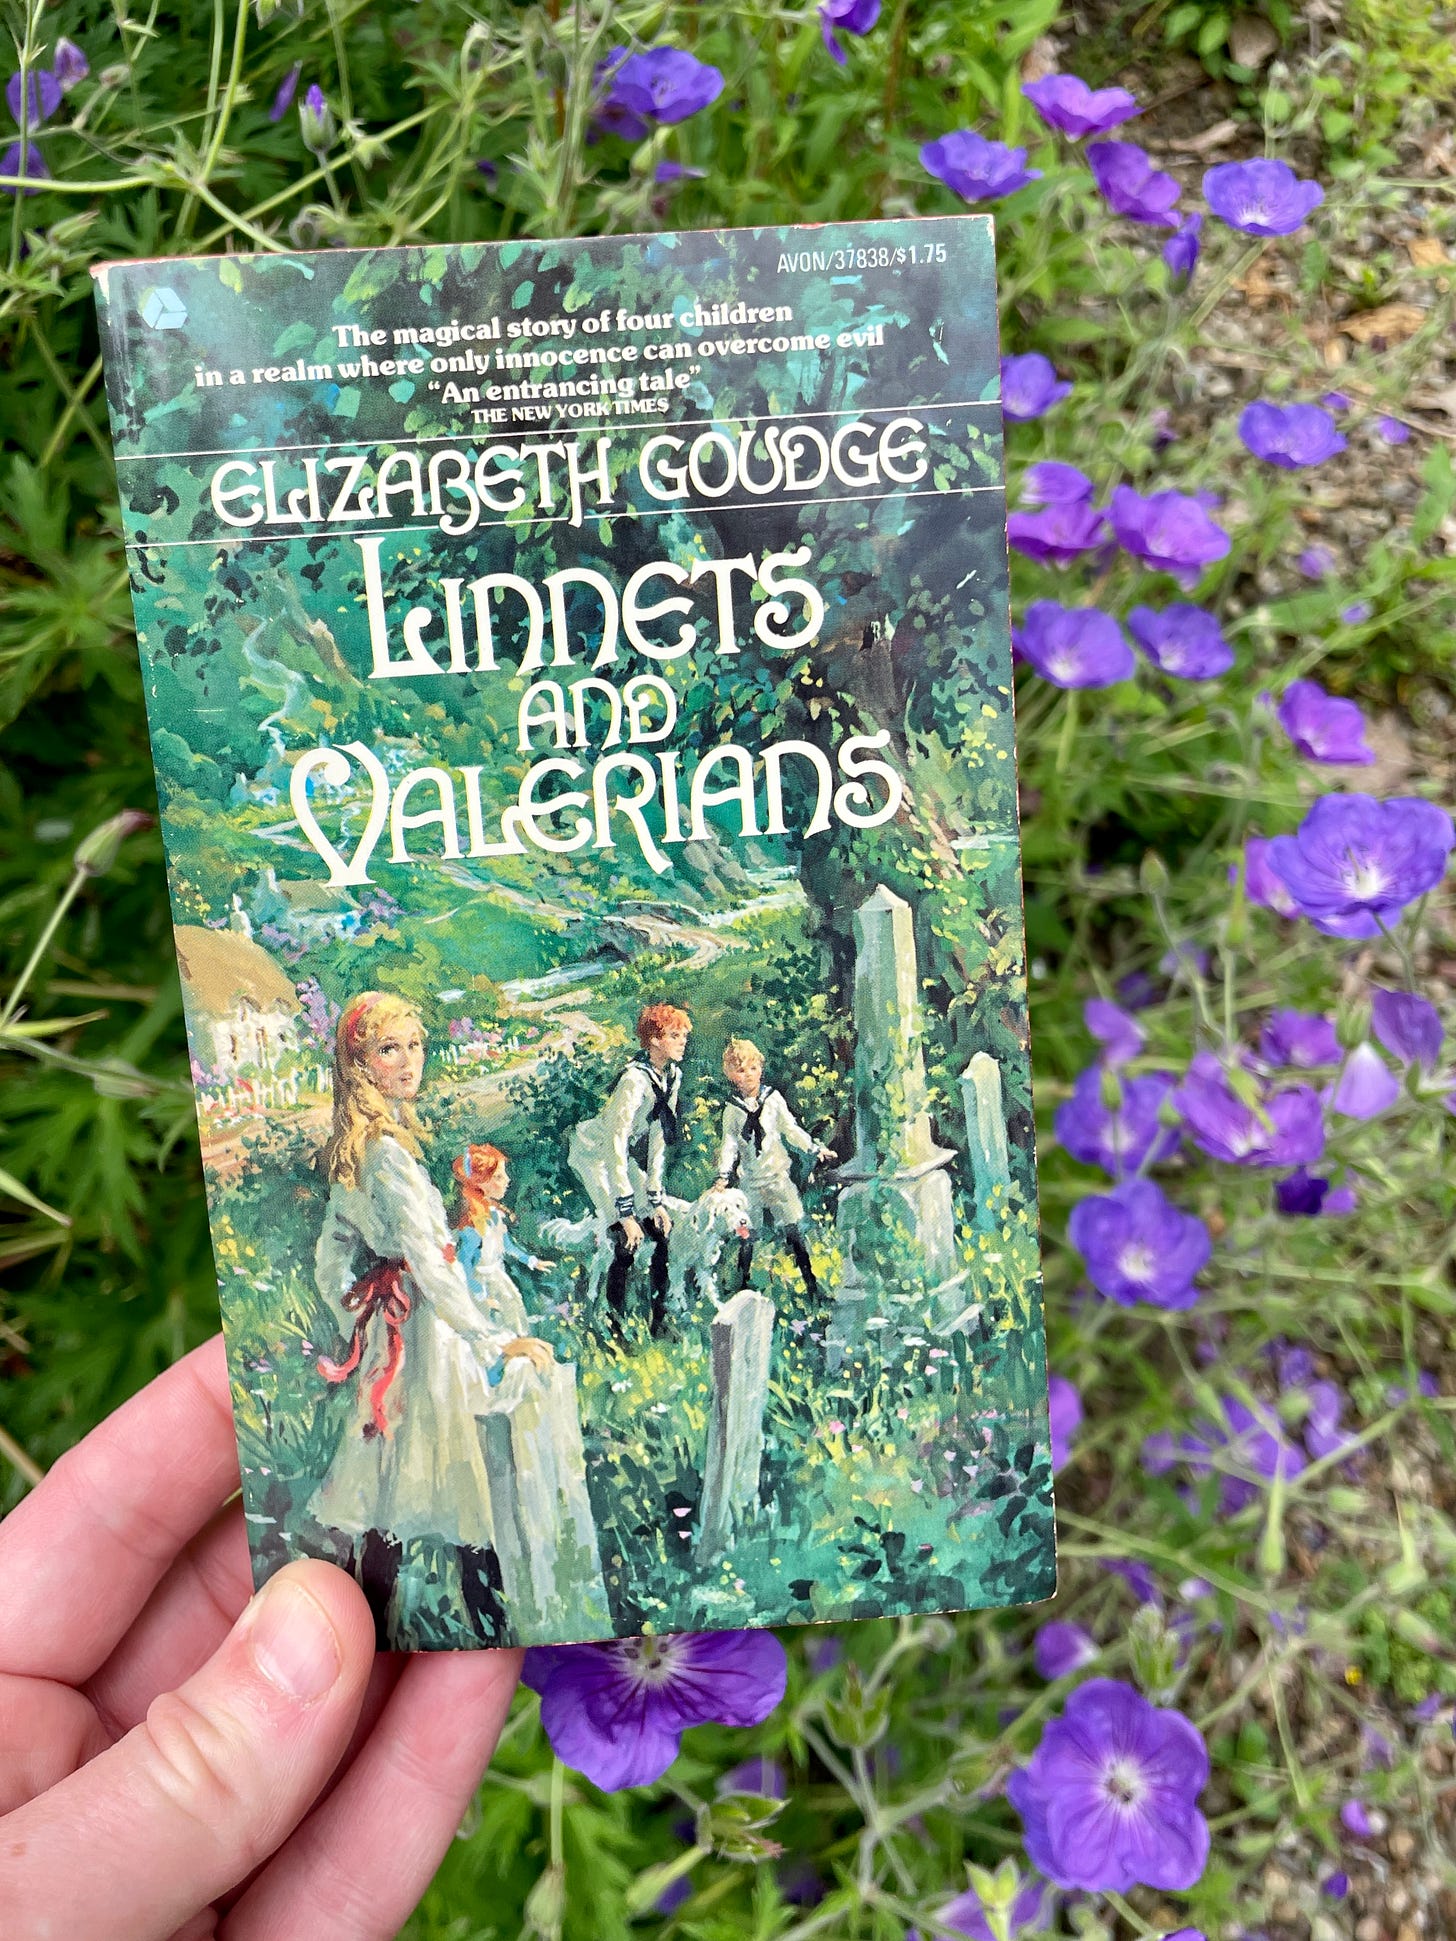 Paperback edition with a beautiful cover of Linnets & Valerians by Elizabeth Goudge